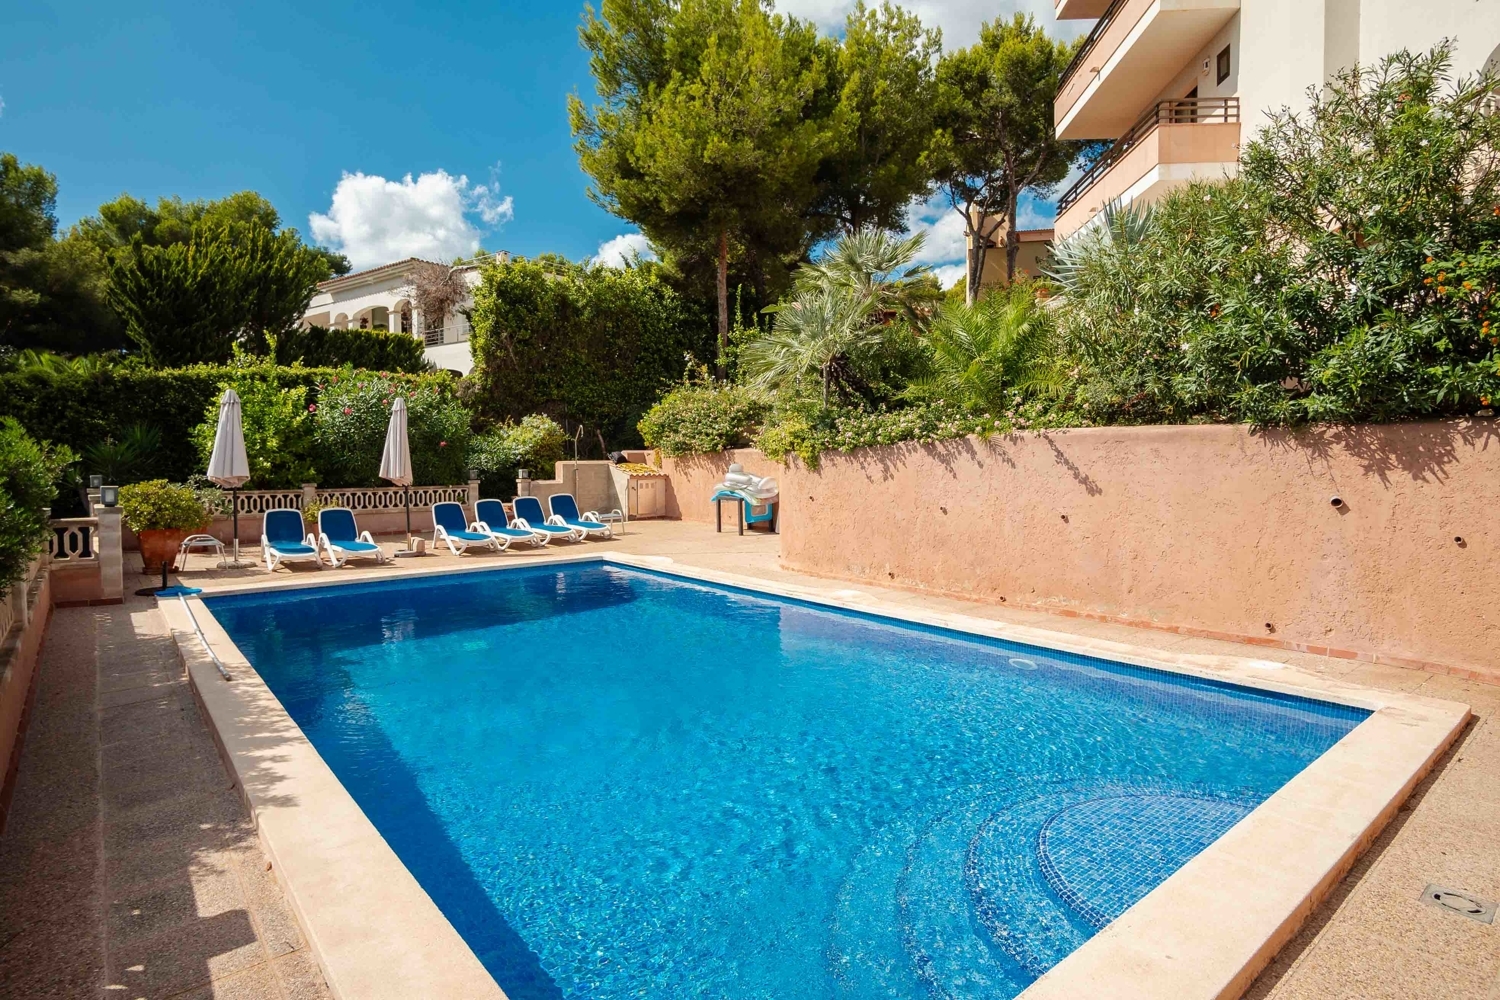 Charming penthouse with sea views and community pool in Cala Vinyes